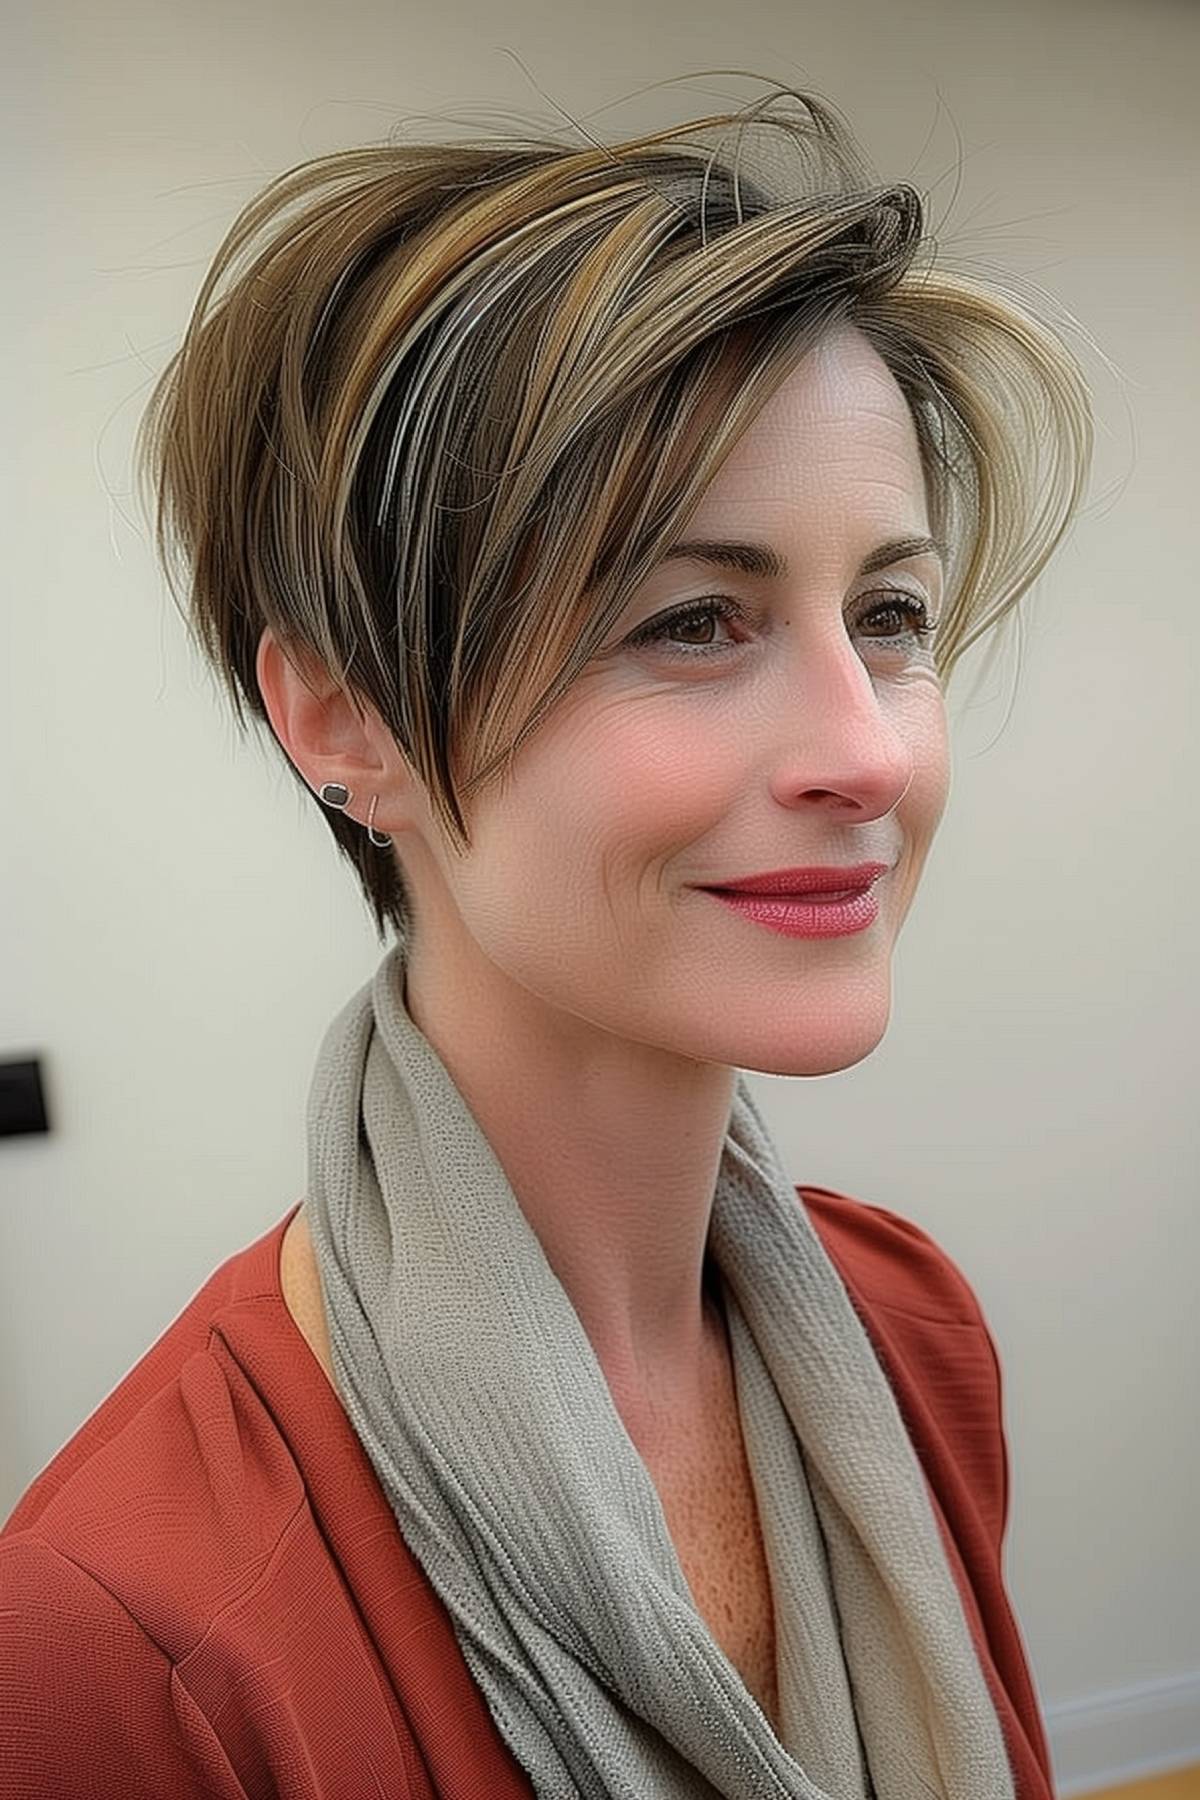 The confident woman sports an angular pixie cut with sharp layers, creating a modern and stylish profile.